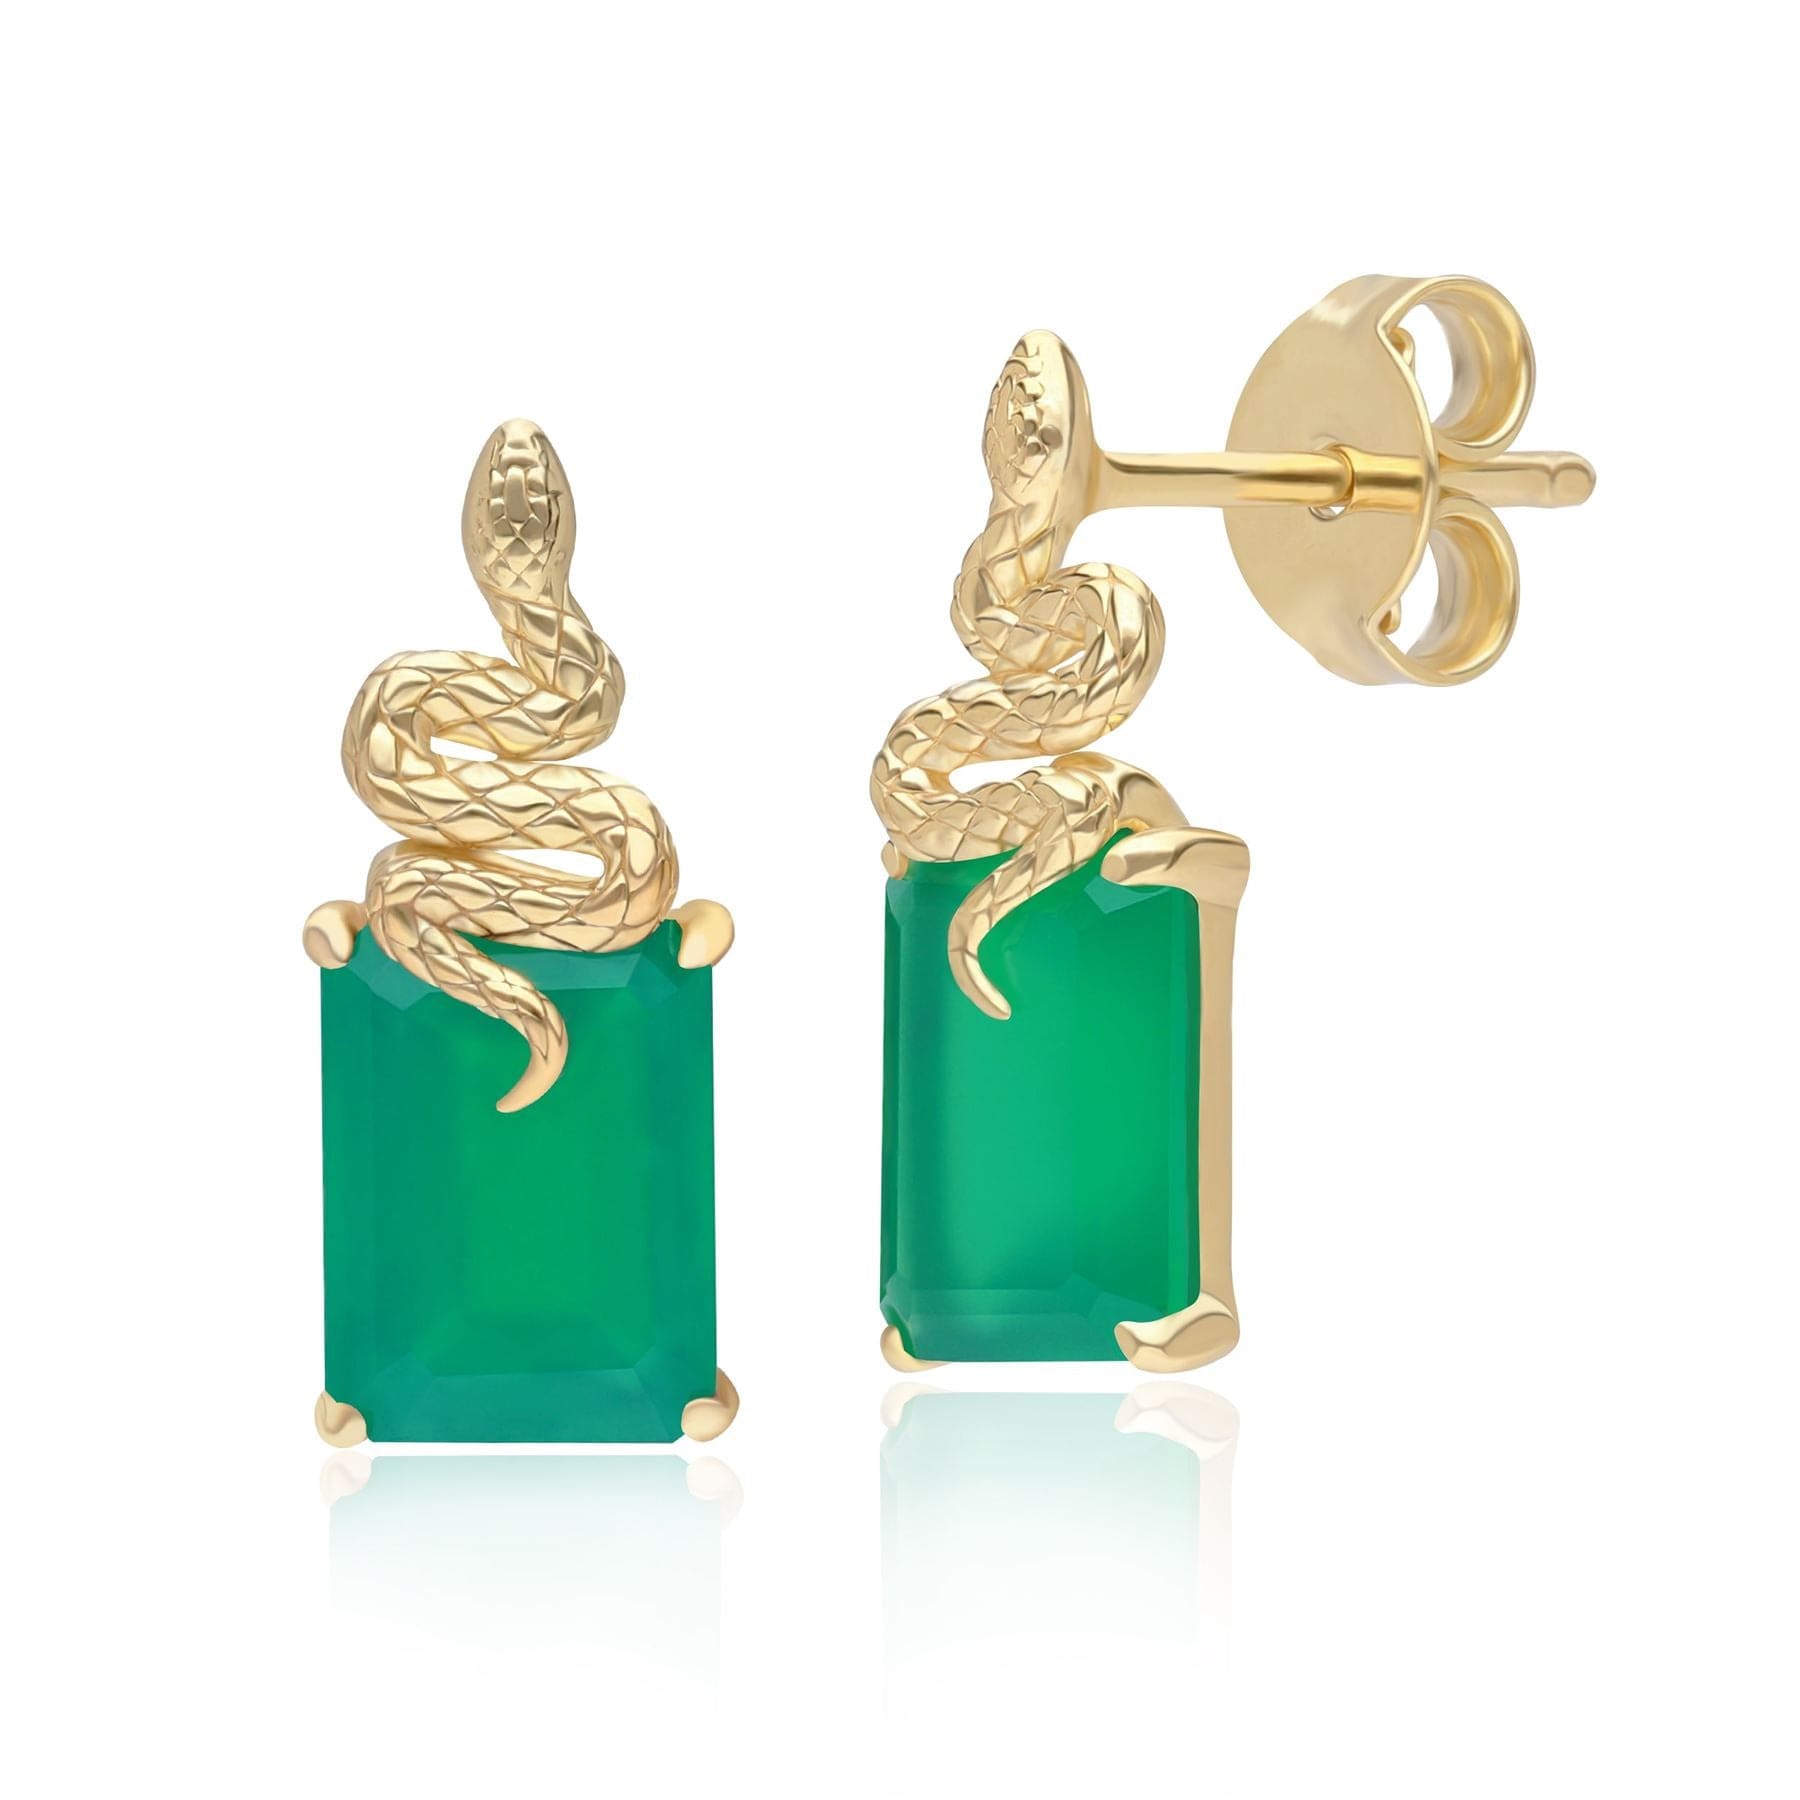 Grand Deco Green Chalcedony Snake Stud Earrings in Gold Plated Sterling Silver - Gemondo